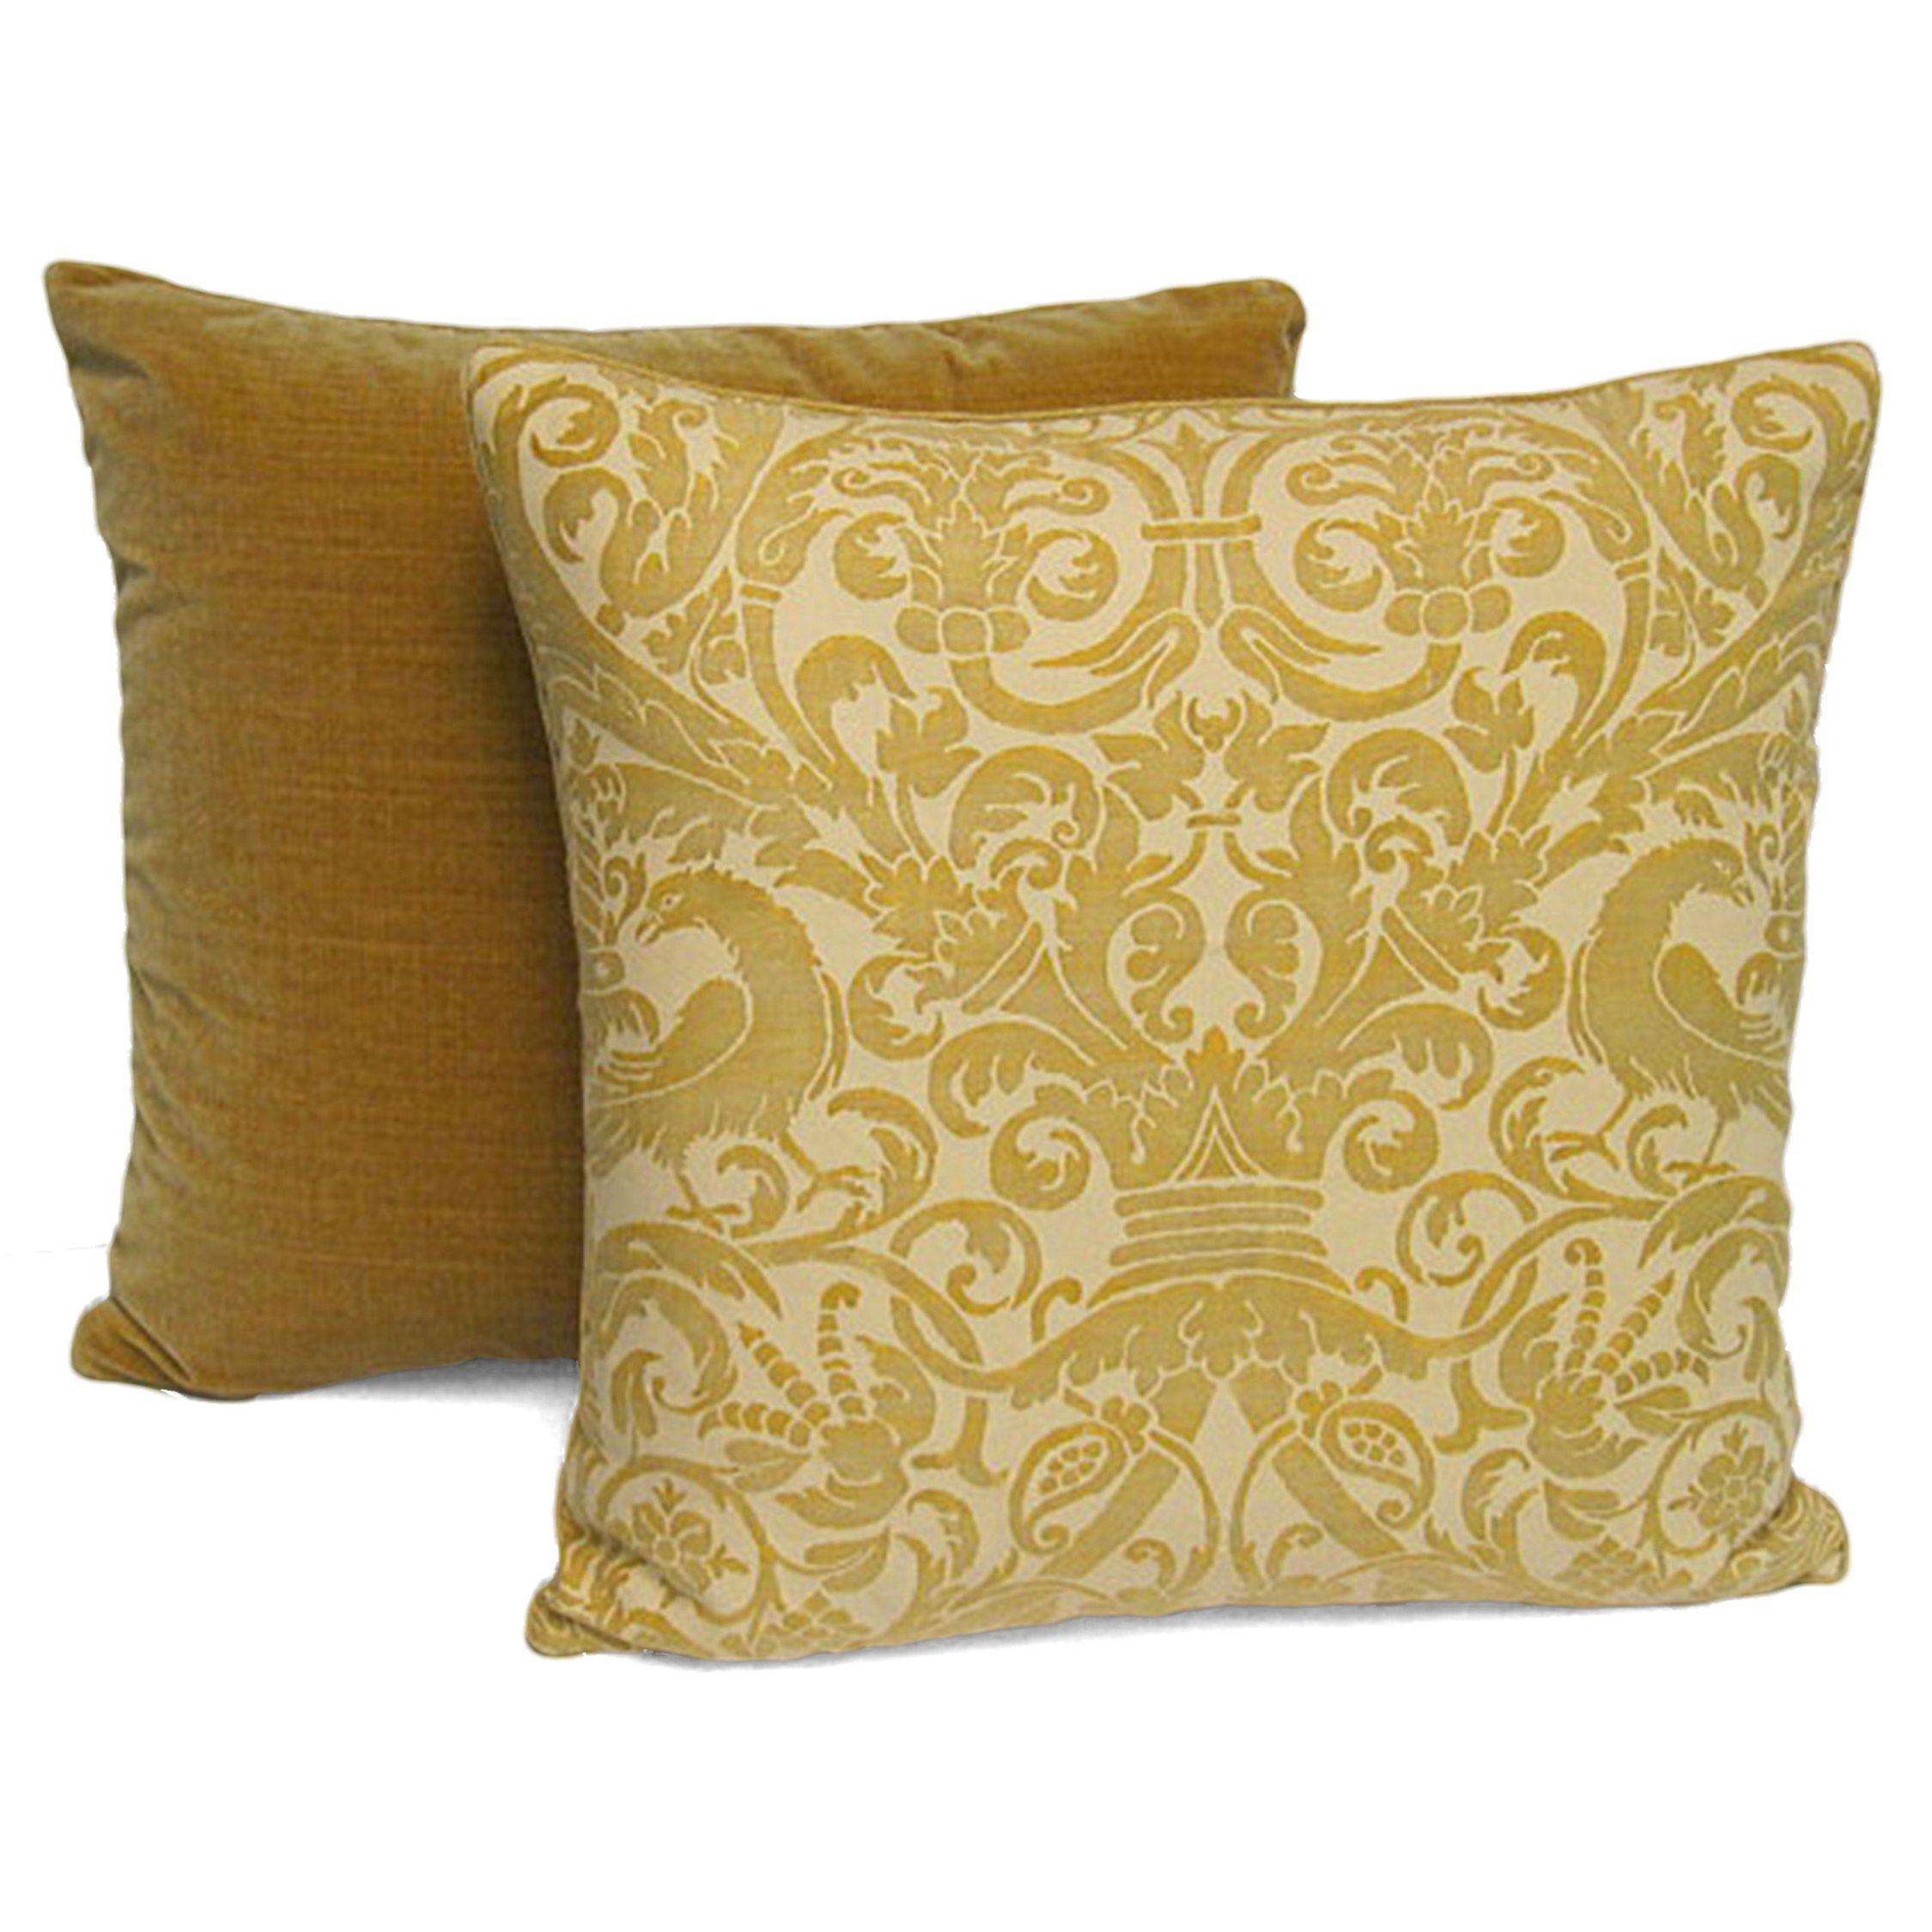 Pair of handmade yellow cotton and velvet pillows with a rope trim. The pattern, depicting birds and floral motifs, is based on a 17th century French design. 100% goose down filling.